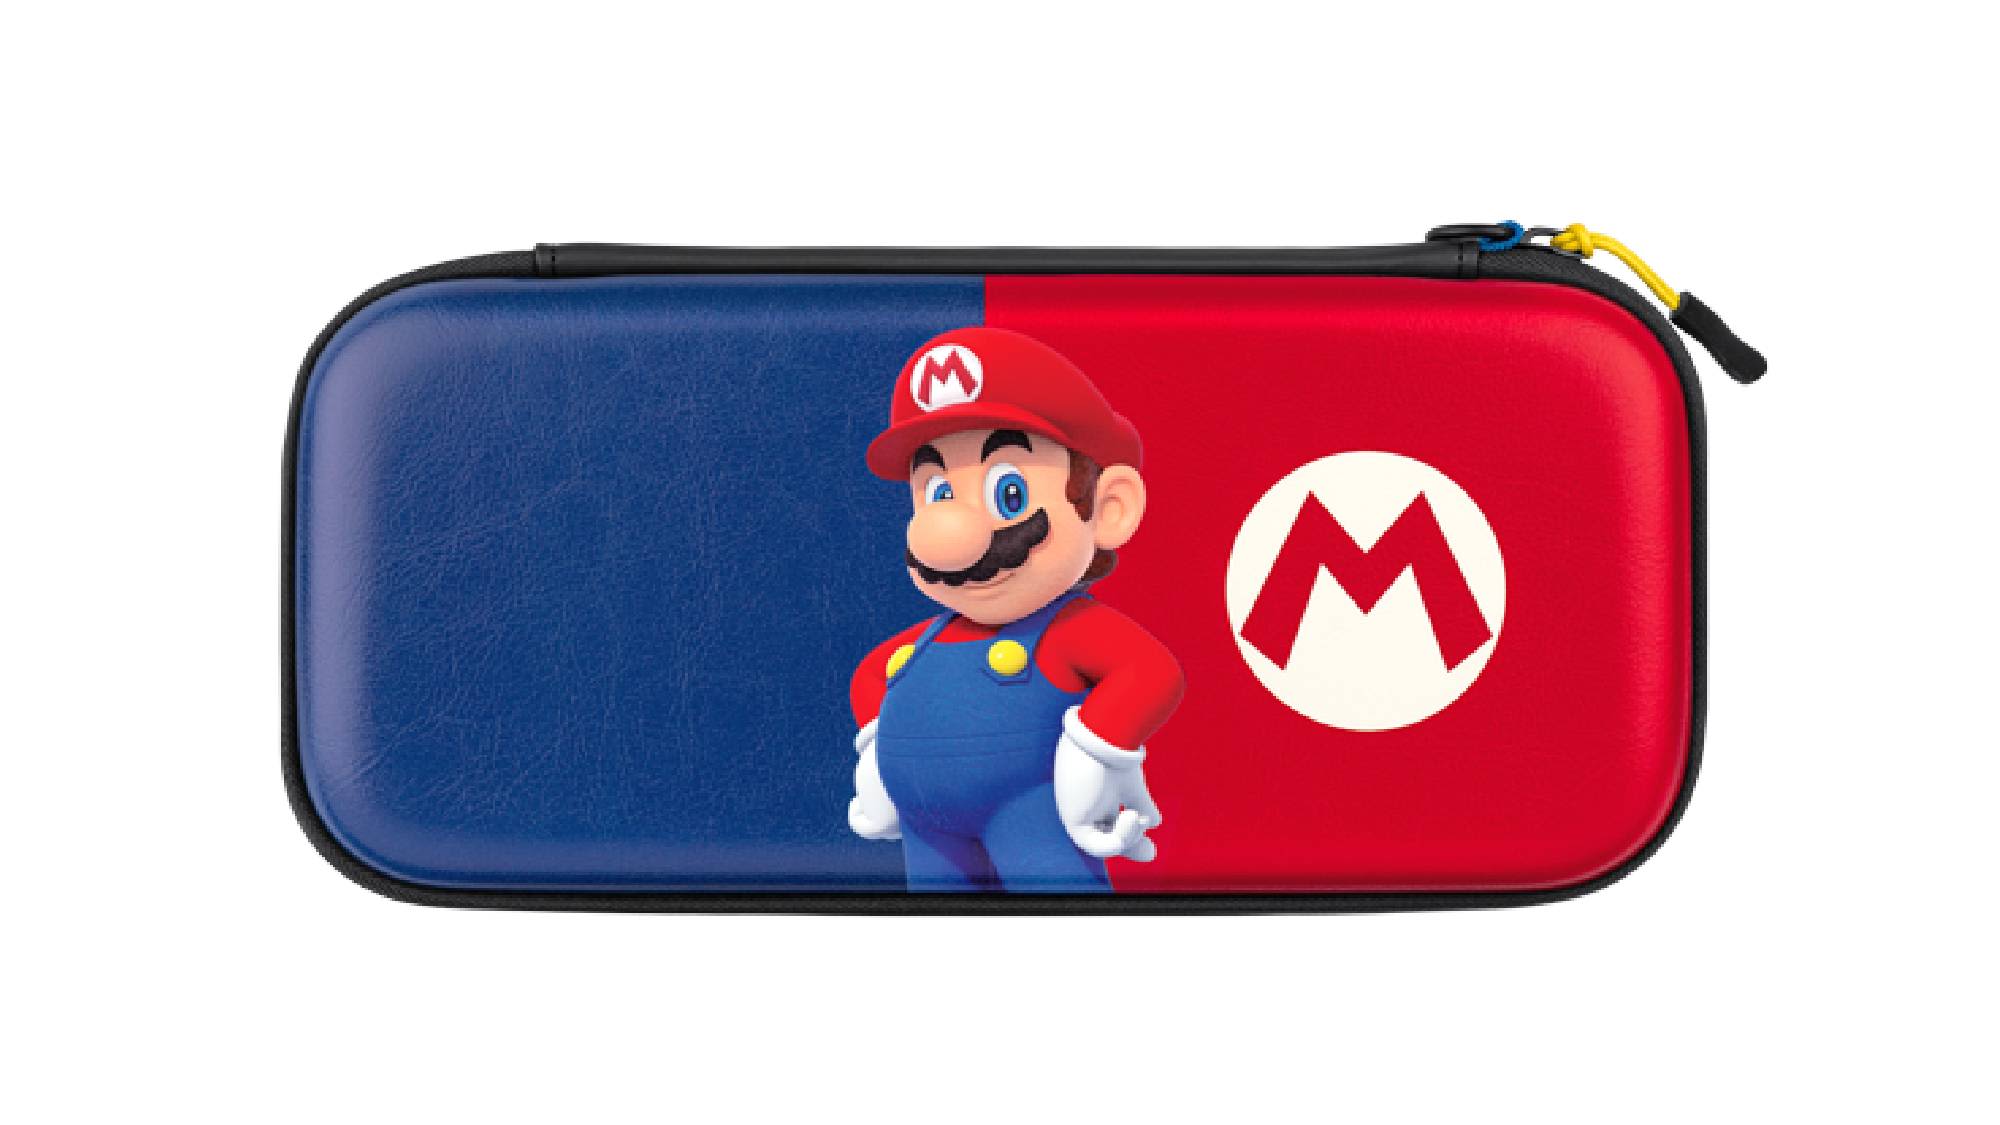 It's MAR10 Day, so here are some deals on Mario games and gear